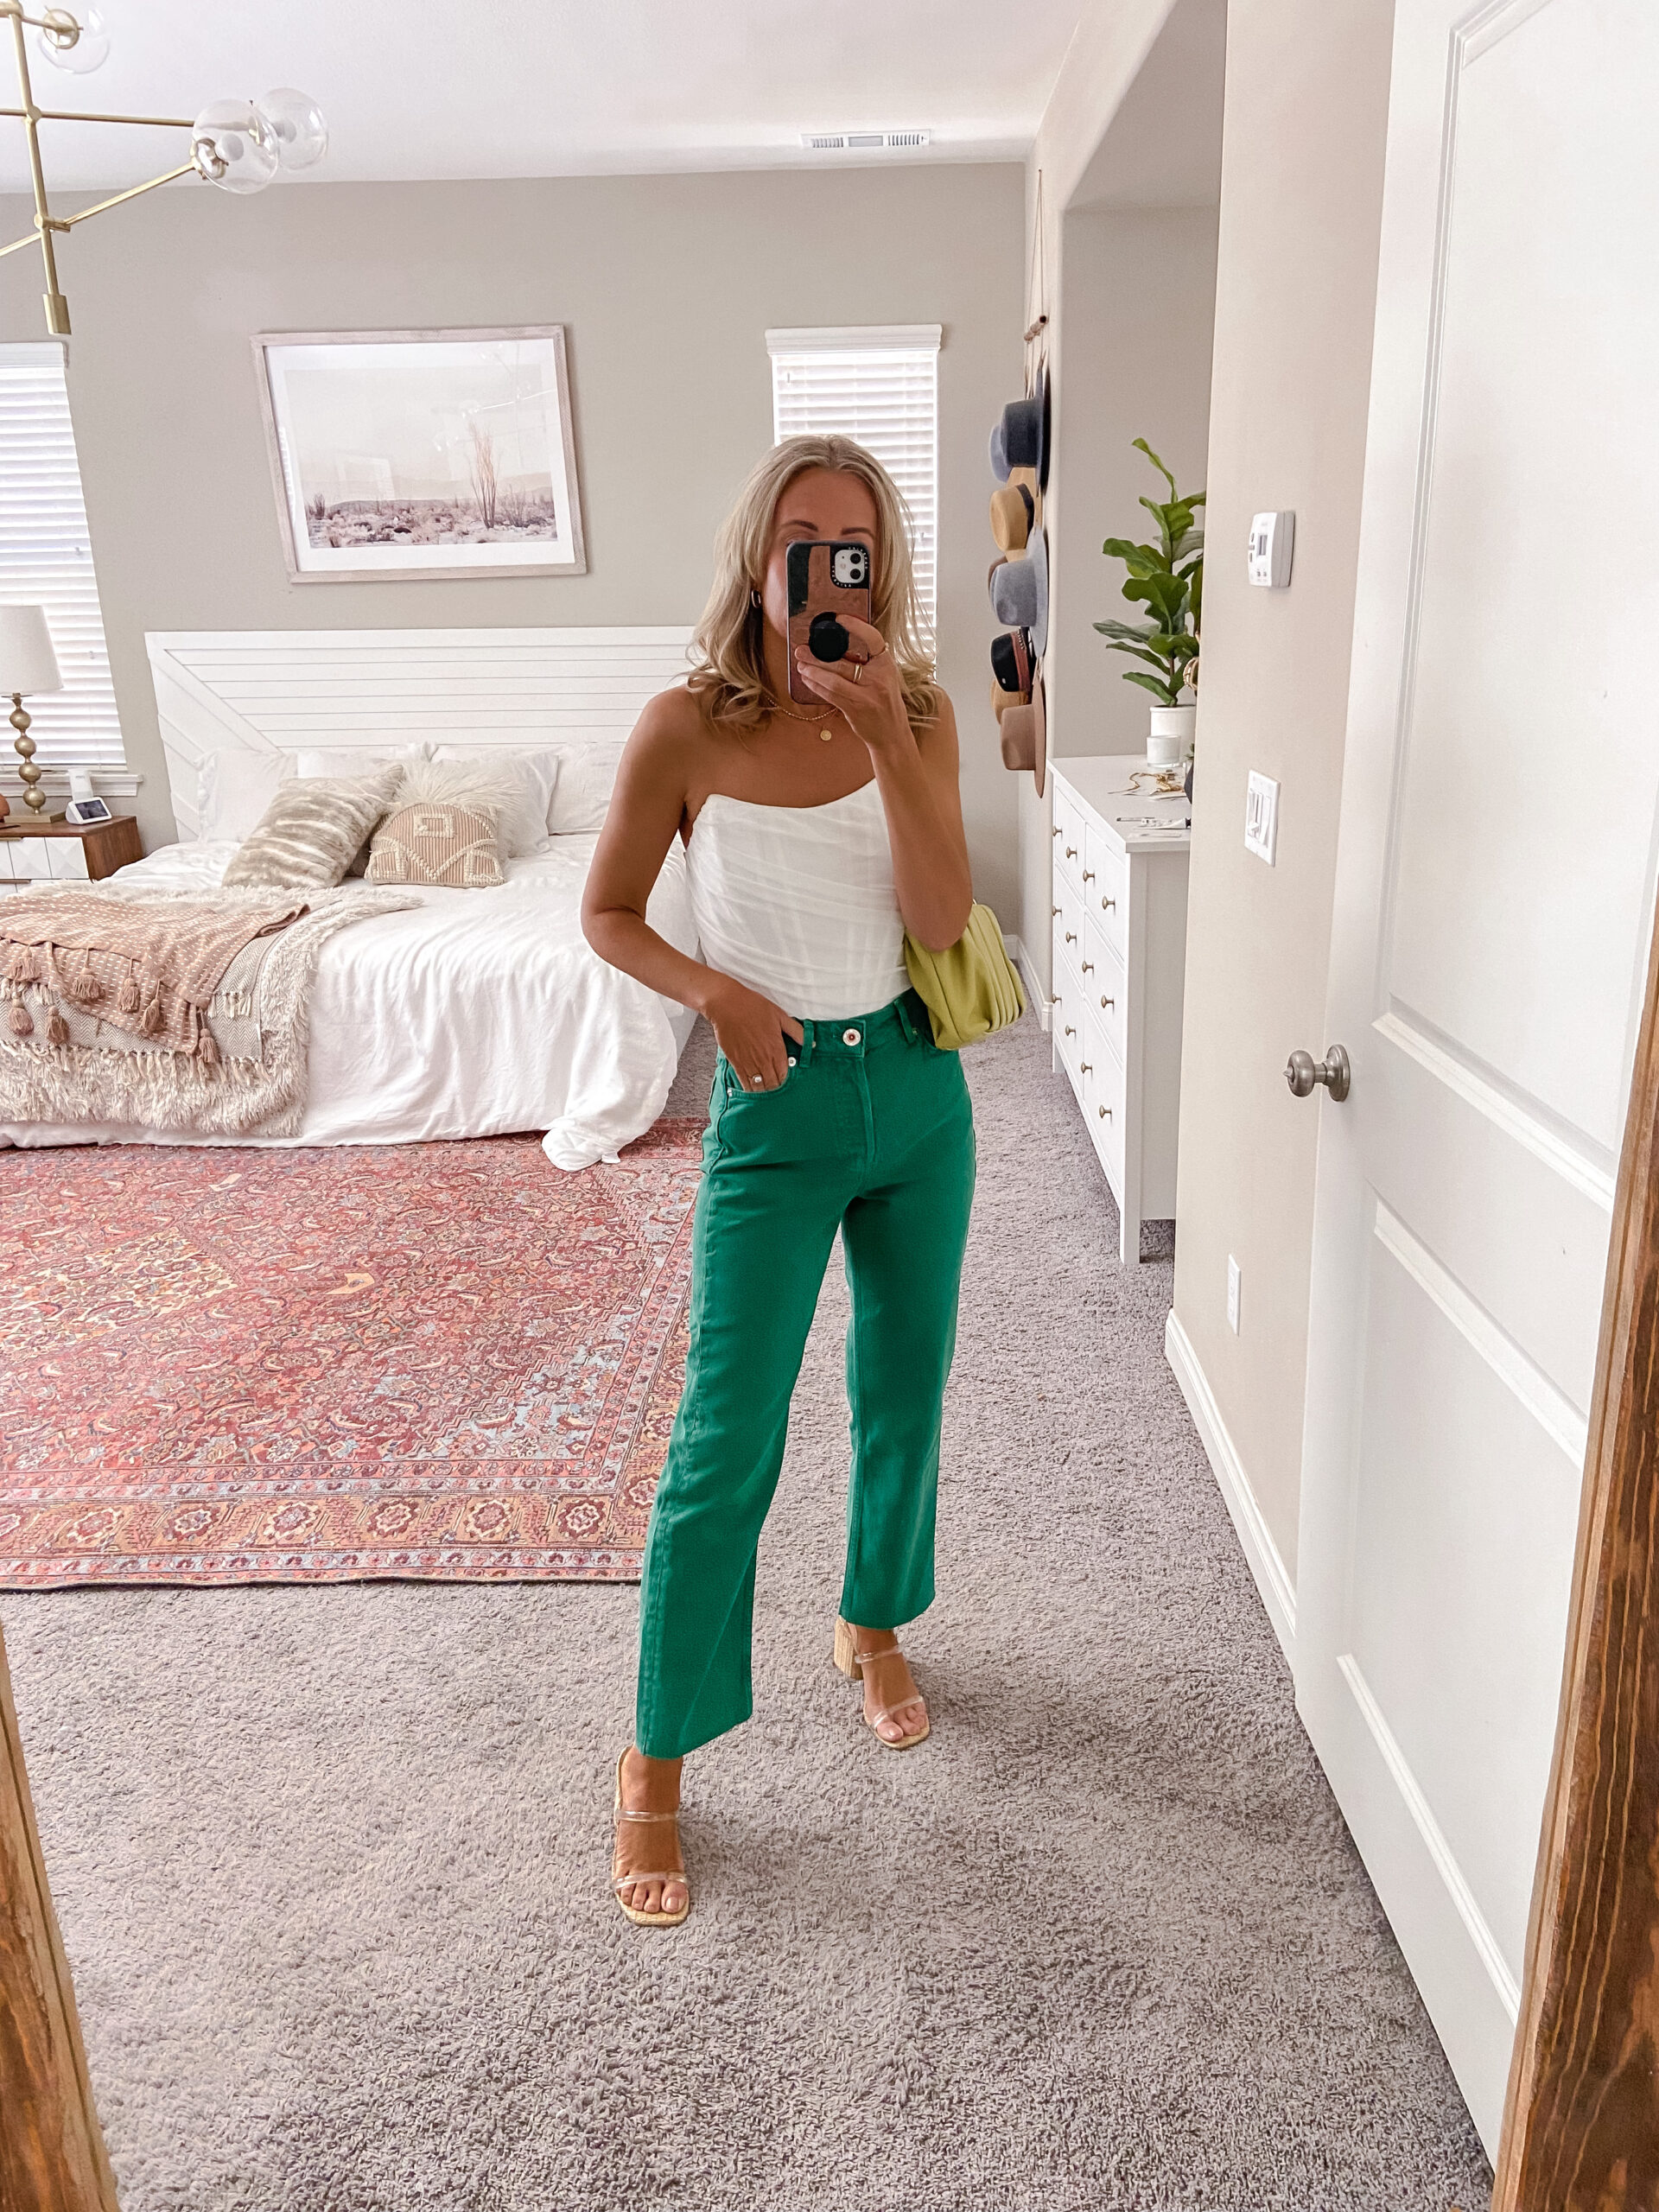 THE COLOR TREND FOR SUMMER- Jaclyn De Leon. This season is all about fun bold colors. From pink to green and every color in between. Start off wearing bold colors with a handbag or statement earrings. If you are feeling bold a pink top or green pants is perfect for summer!